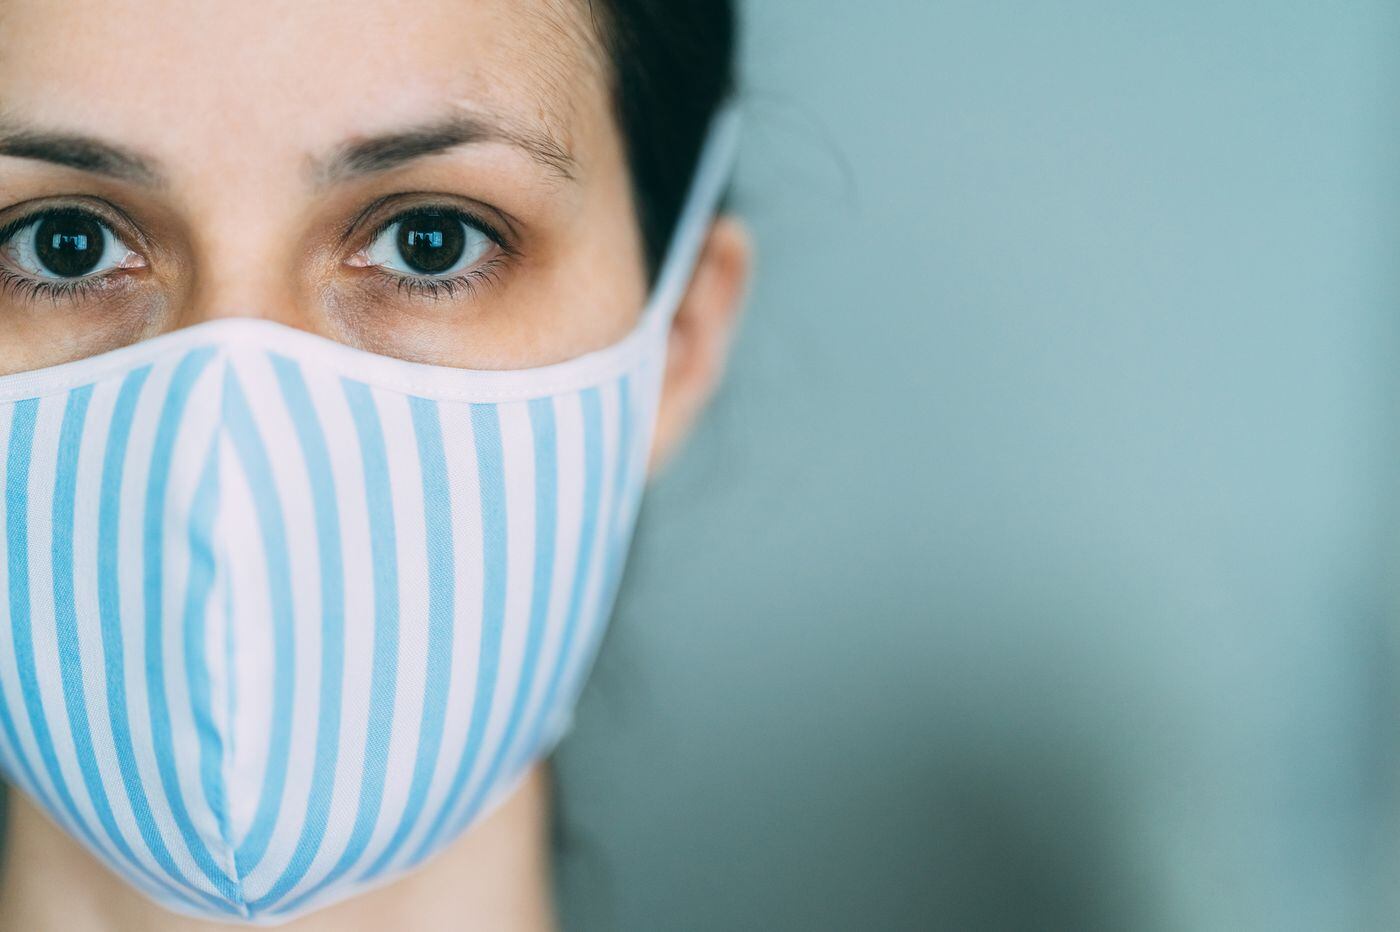 How to prevent face mask skin issues, according to dermatologists